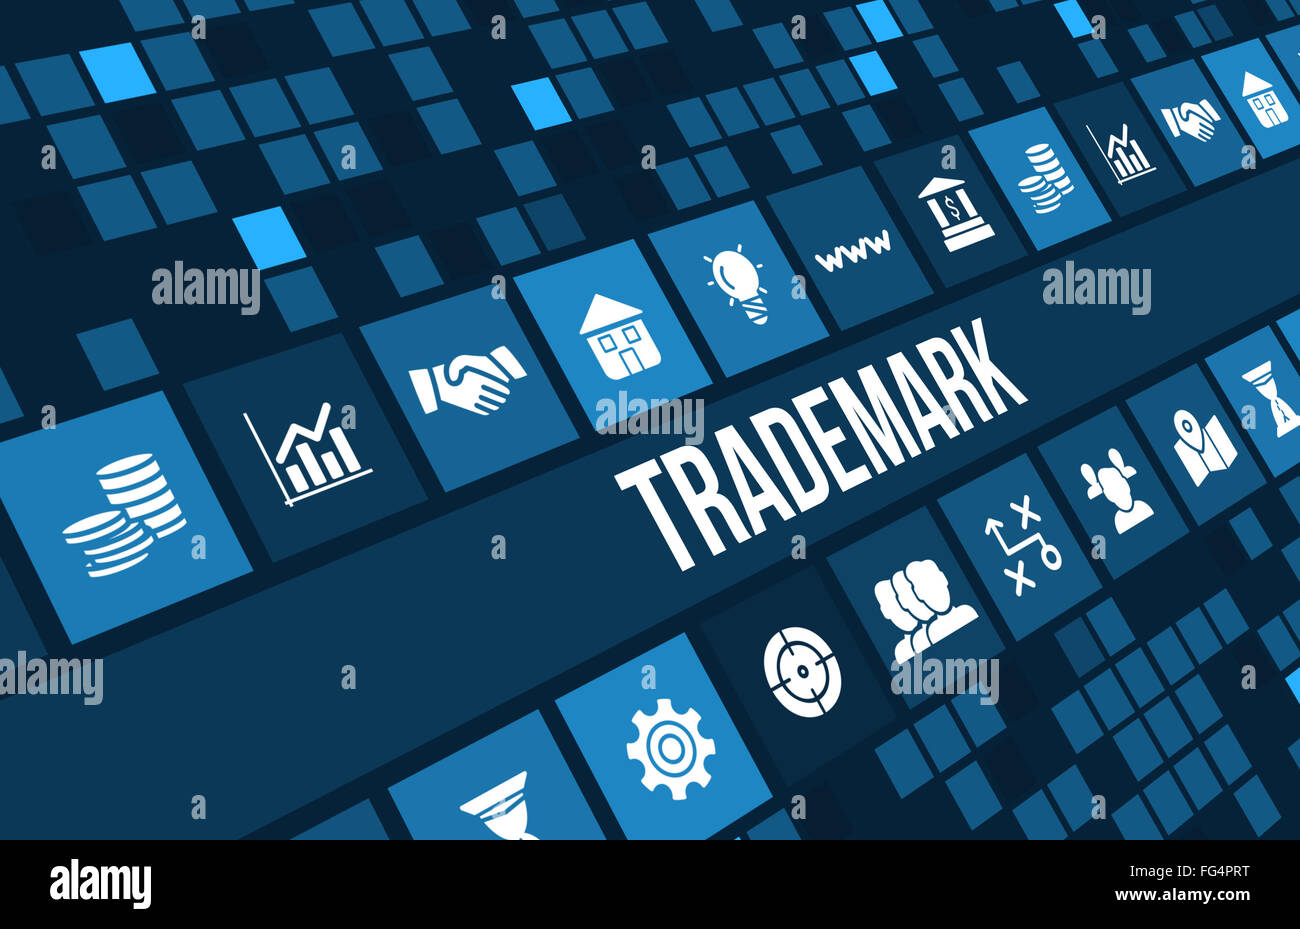 Trademark  concept image with business icons and copyspace. Stock Photo